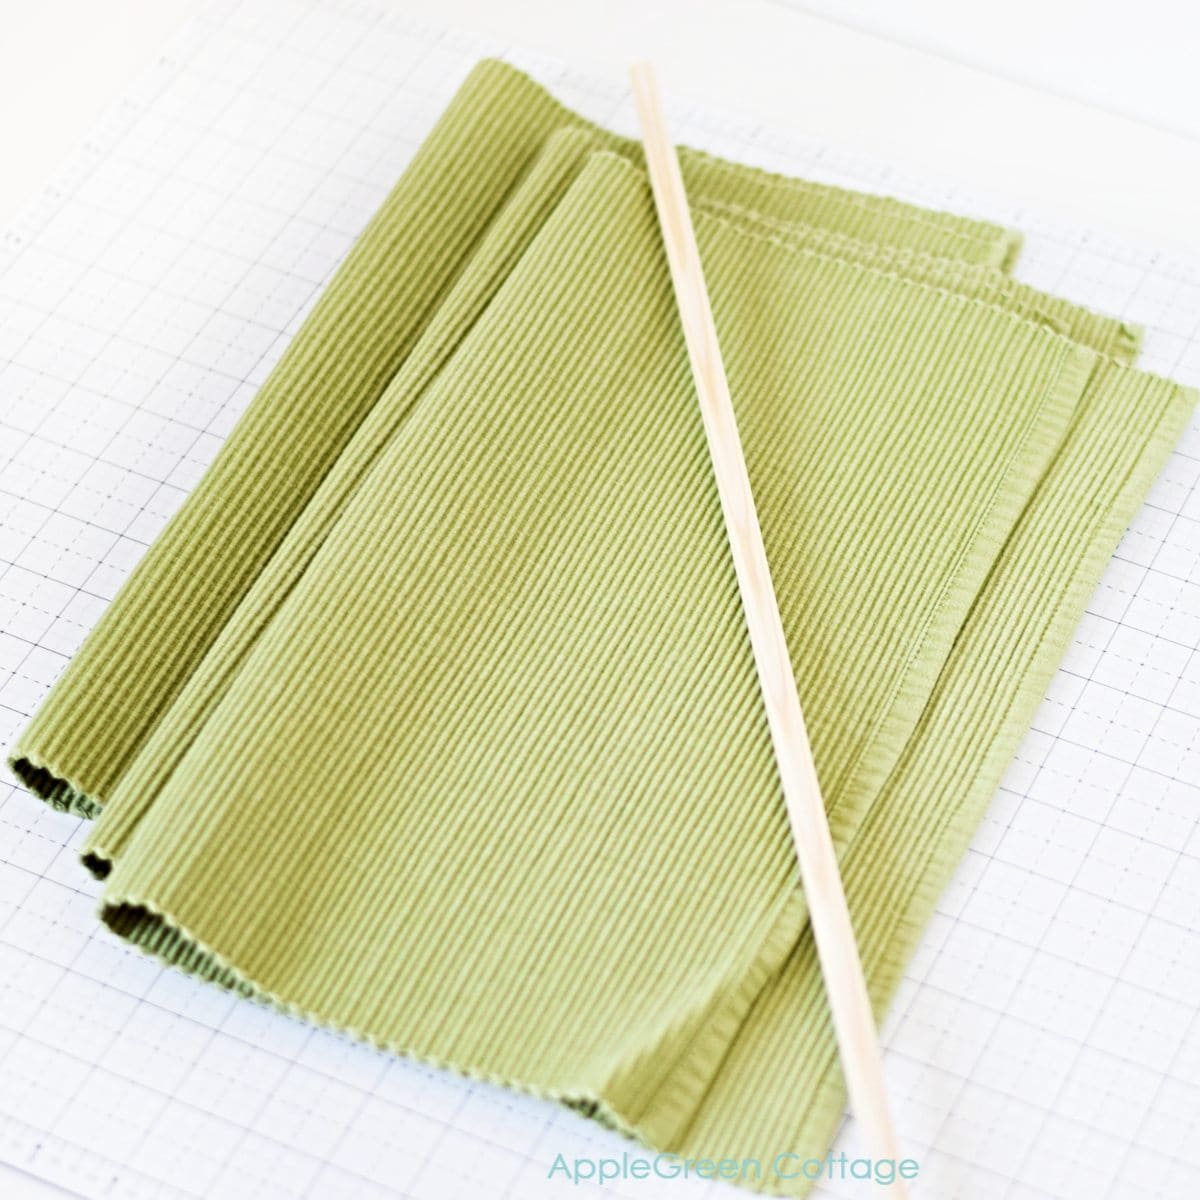 three folded placemats and a dowel rod